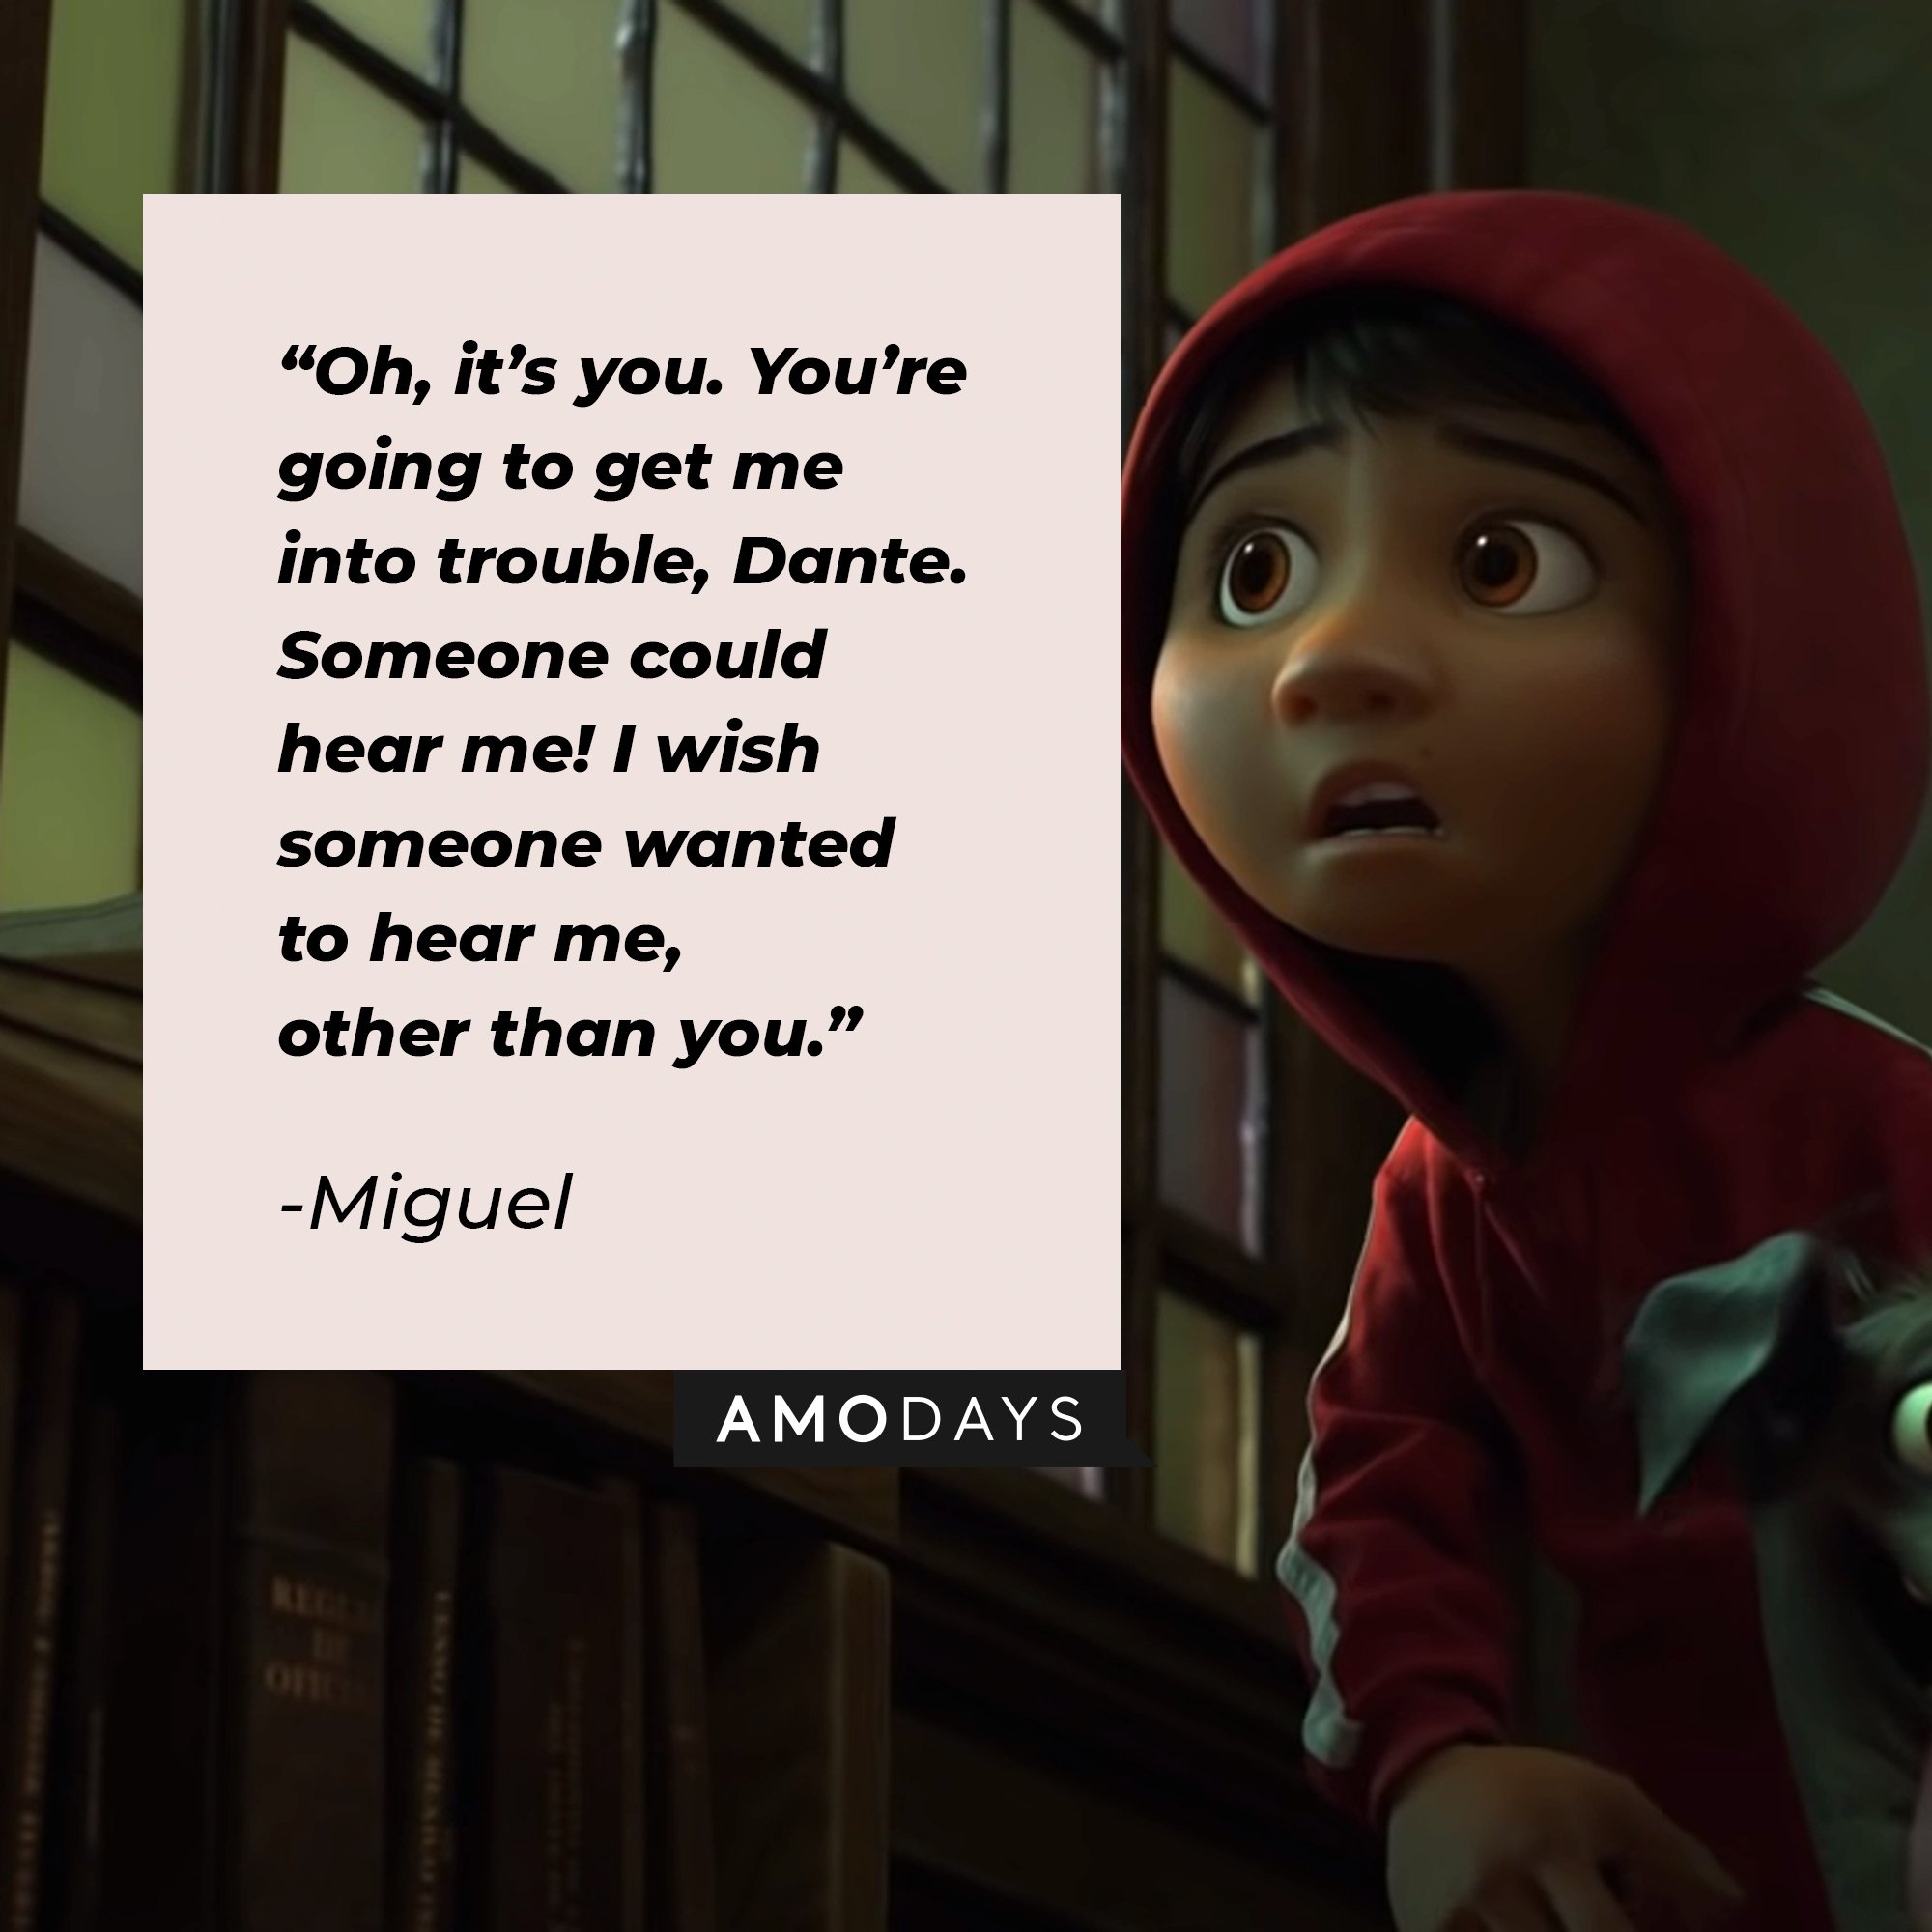 Miguel's quote: “Oh, it’s you. You’re going to get me into trouble, Dante. Someone could hear me! I wish someone wanted to hear me, other than you.” | Image: AmoDays